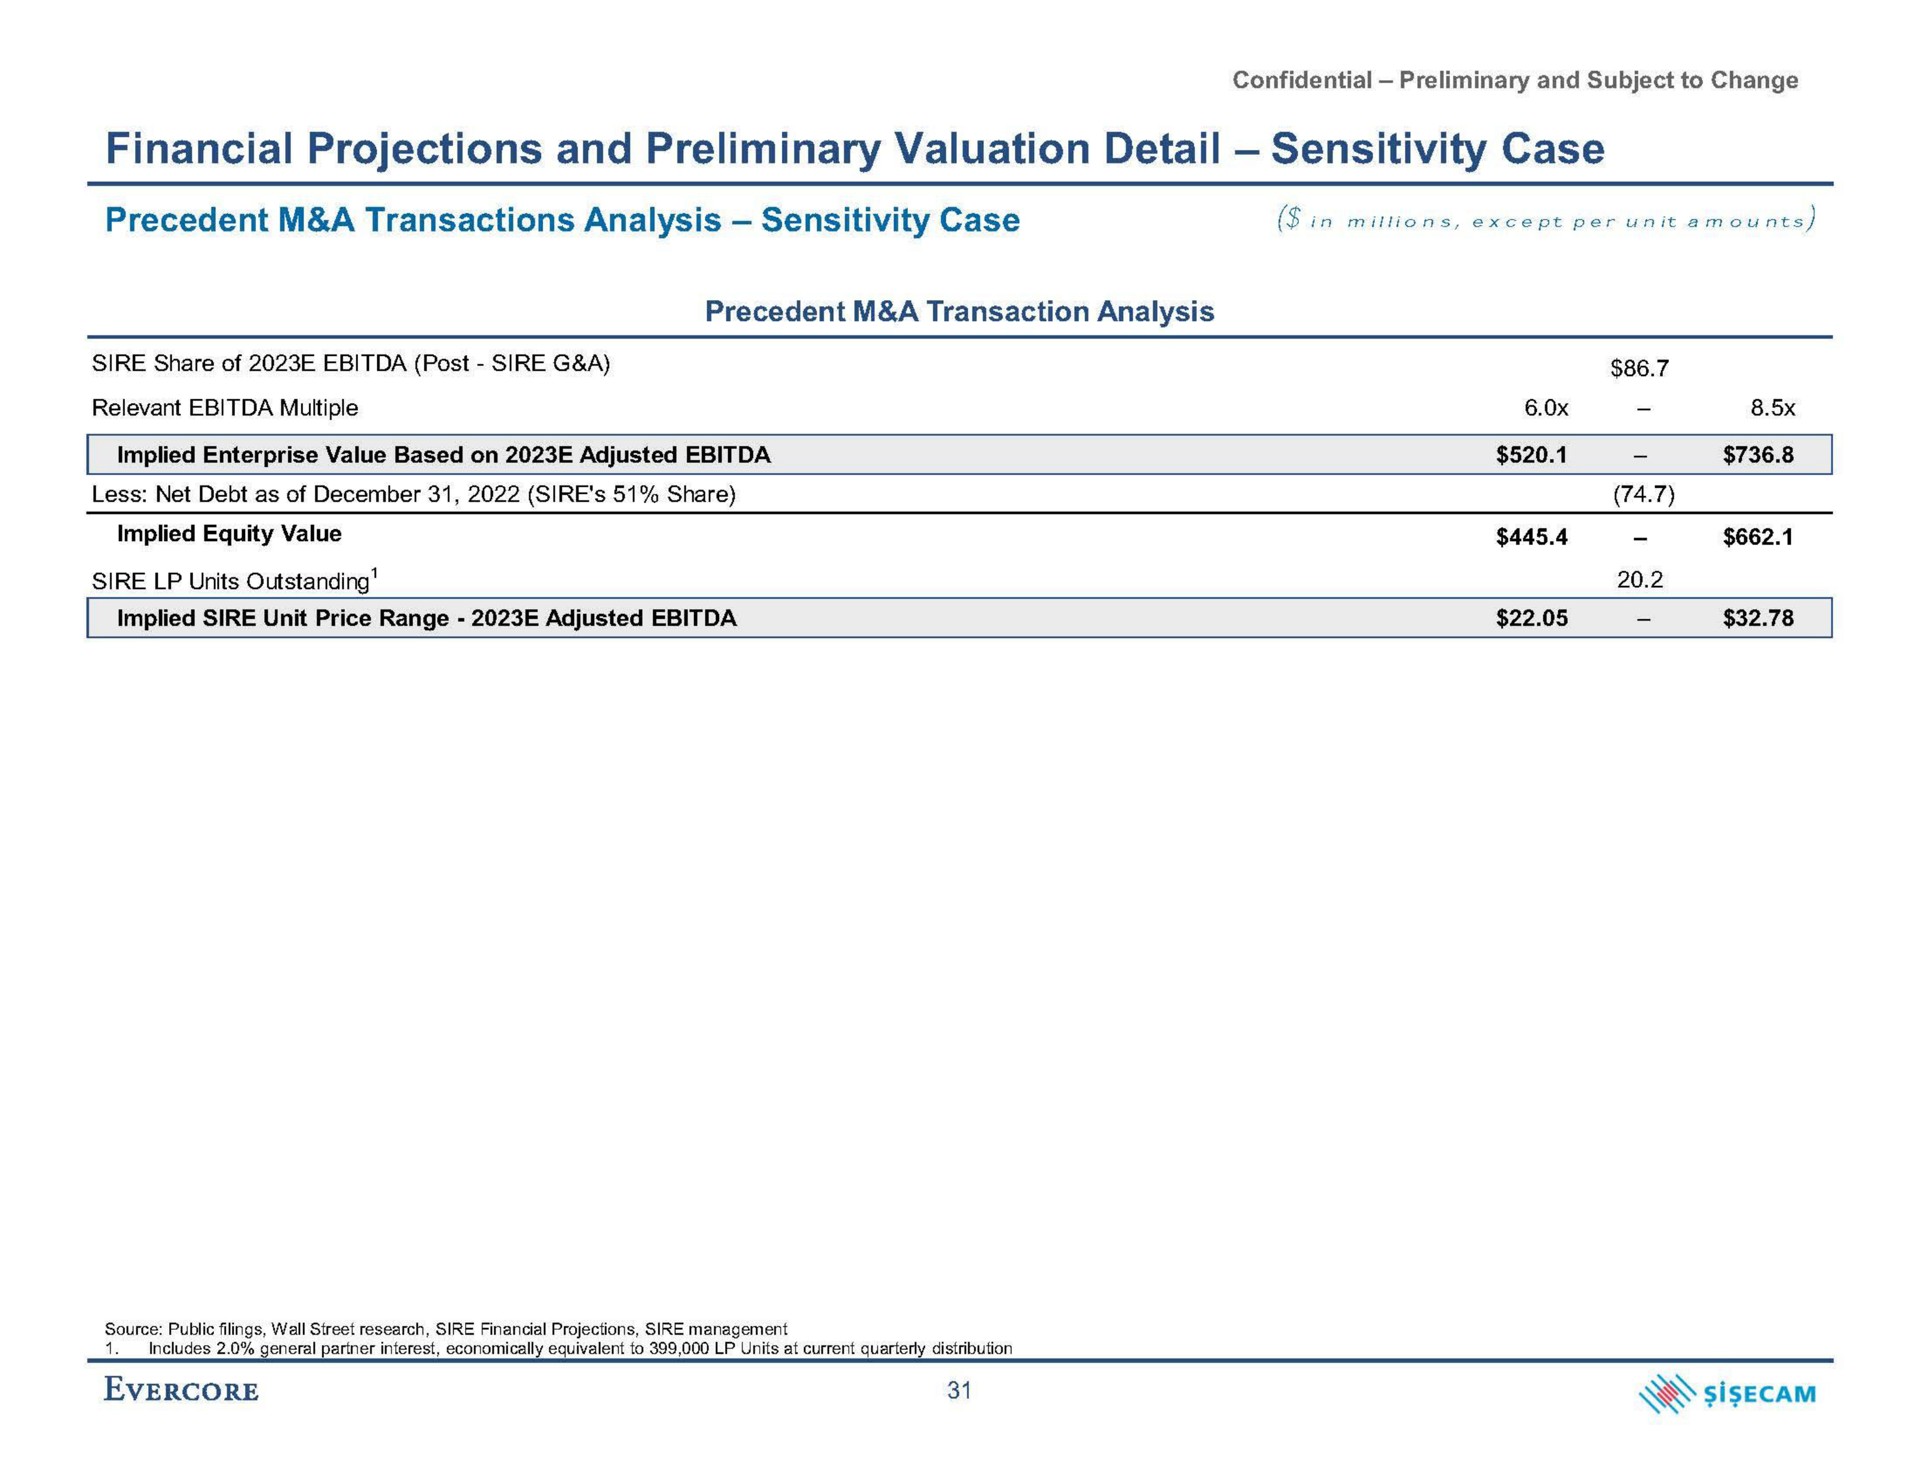 financial projections and preliminary valuation detail sensitivity case precedent a transactions analysis sensitivity case in except per unit amounts | Evercore